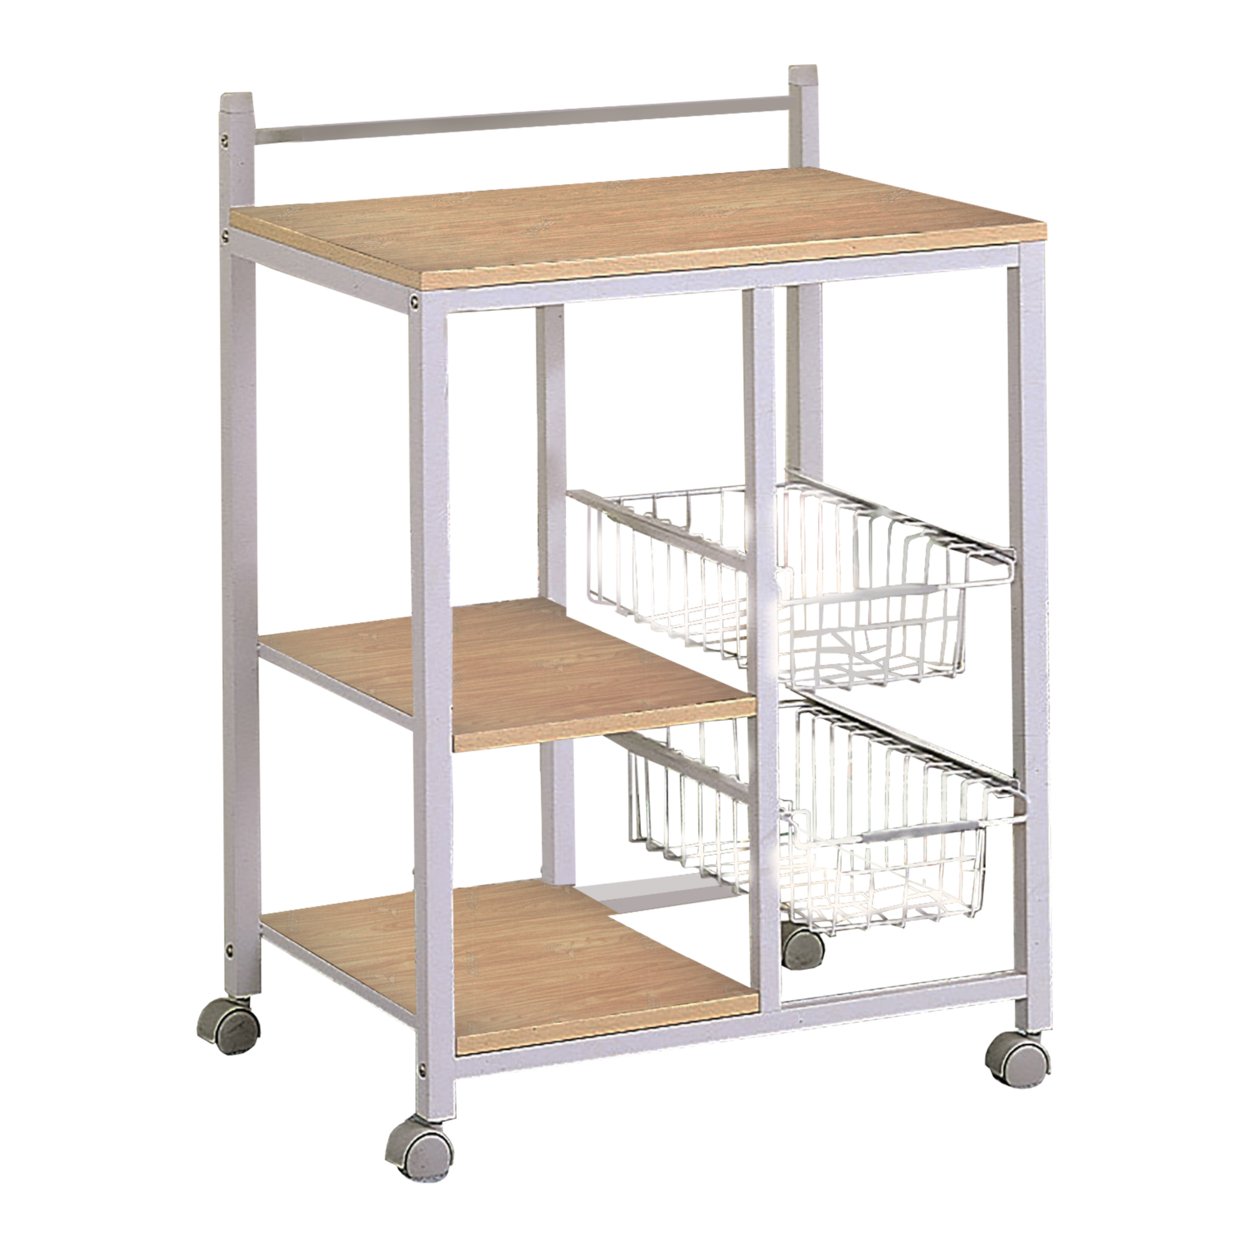 Kitchen Cart With 3 Shelves & 2 Storage Compartments, Brown And White- Saltoro Sherpi